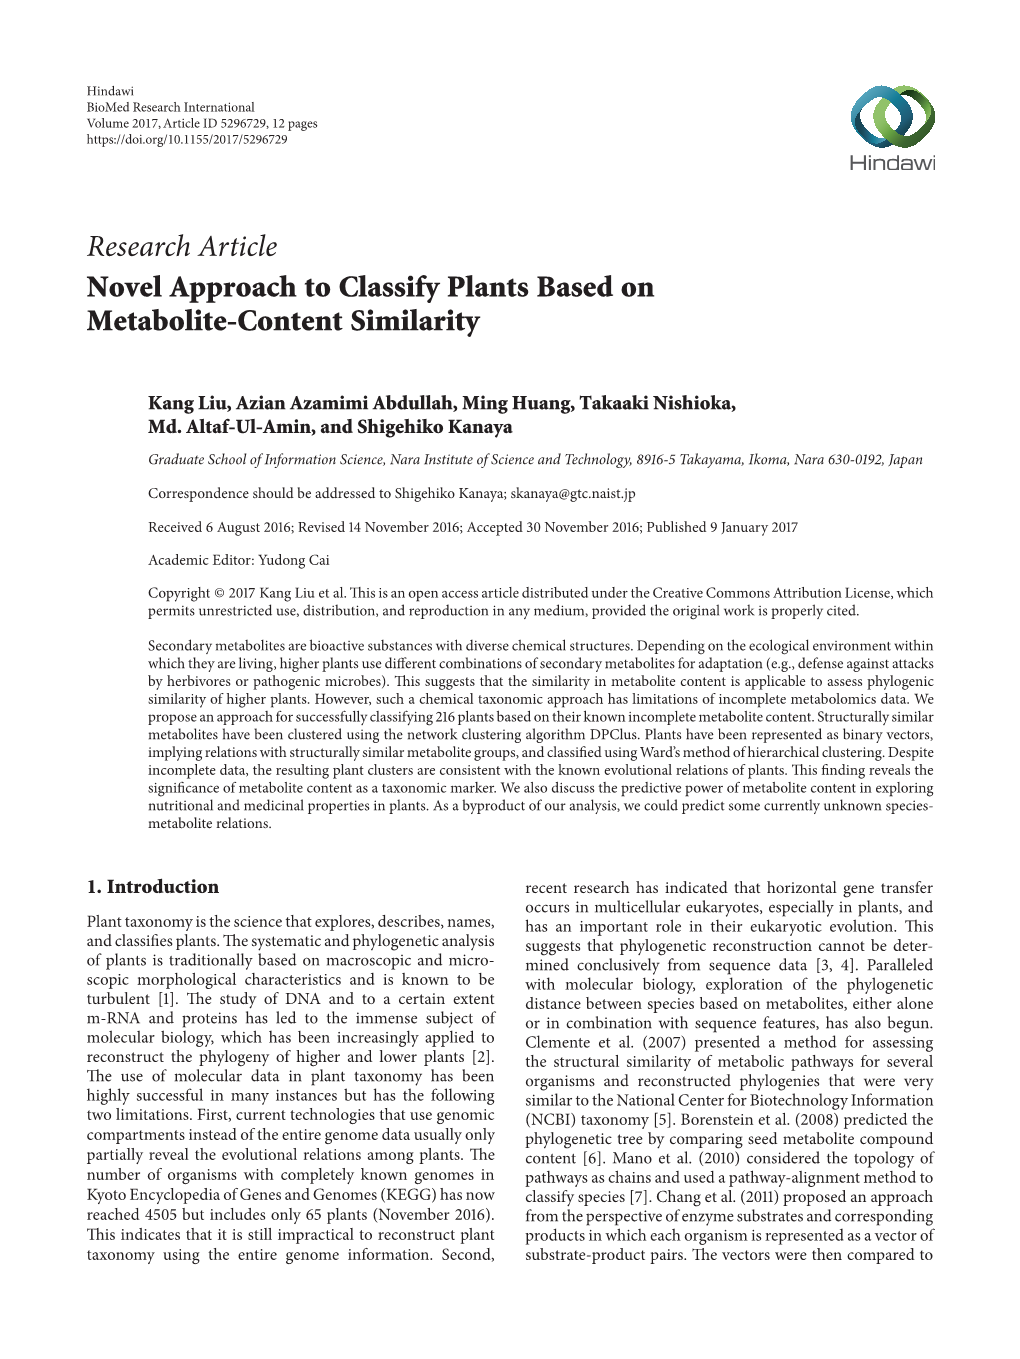 Research Article Novel Approach to Classify Plants Based on Metabolite-Content Similarity